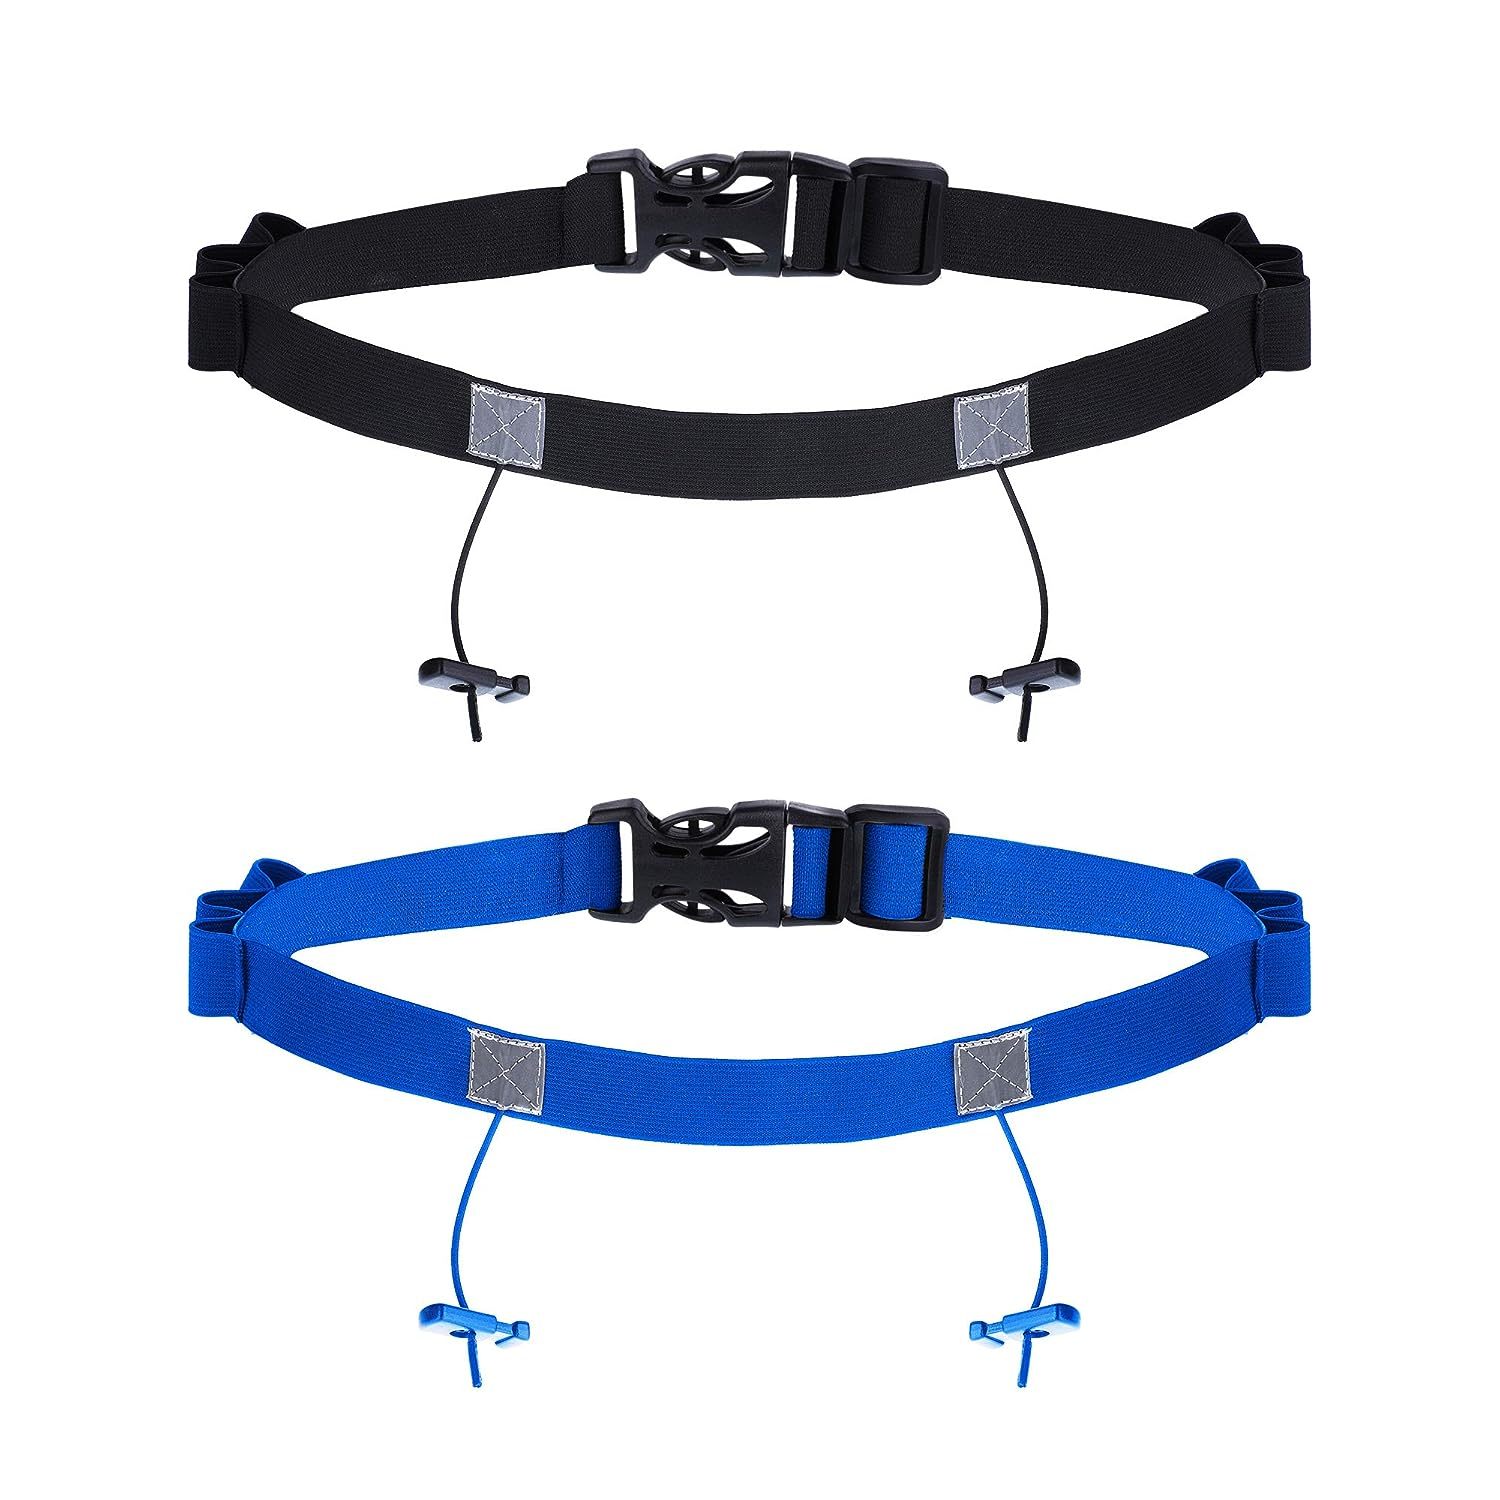 2 Pieces Race Number Belt With 6 Gel Loops and 49 similar items